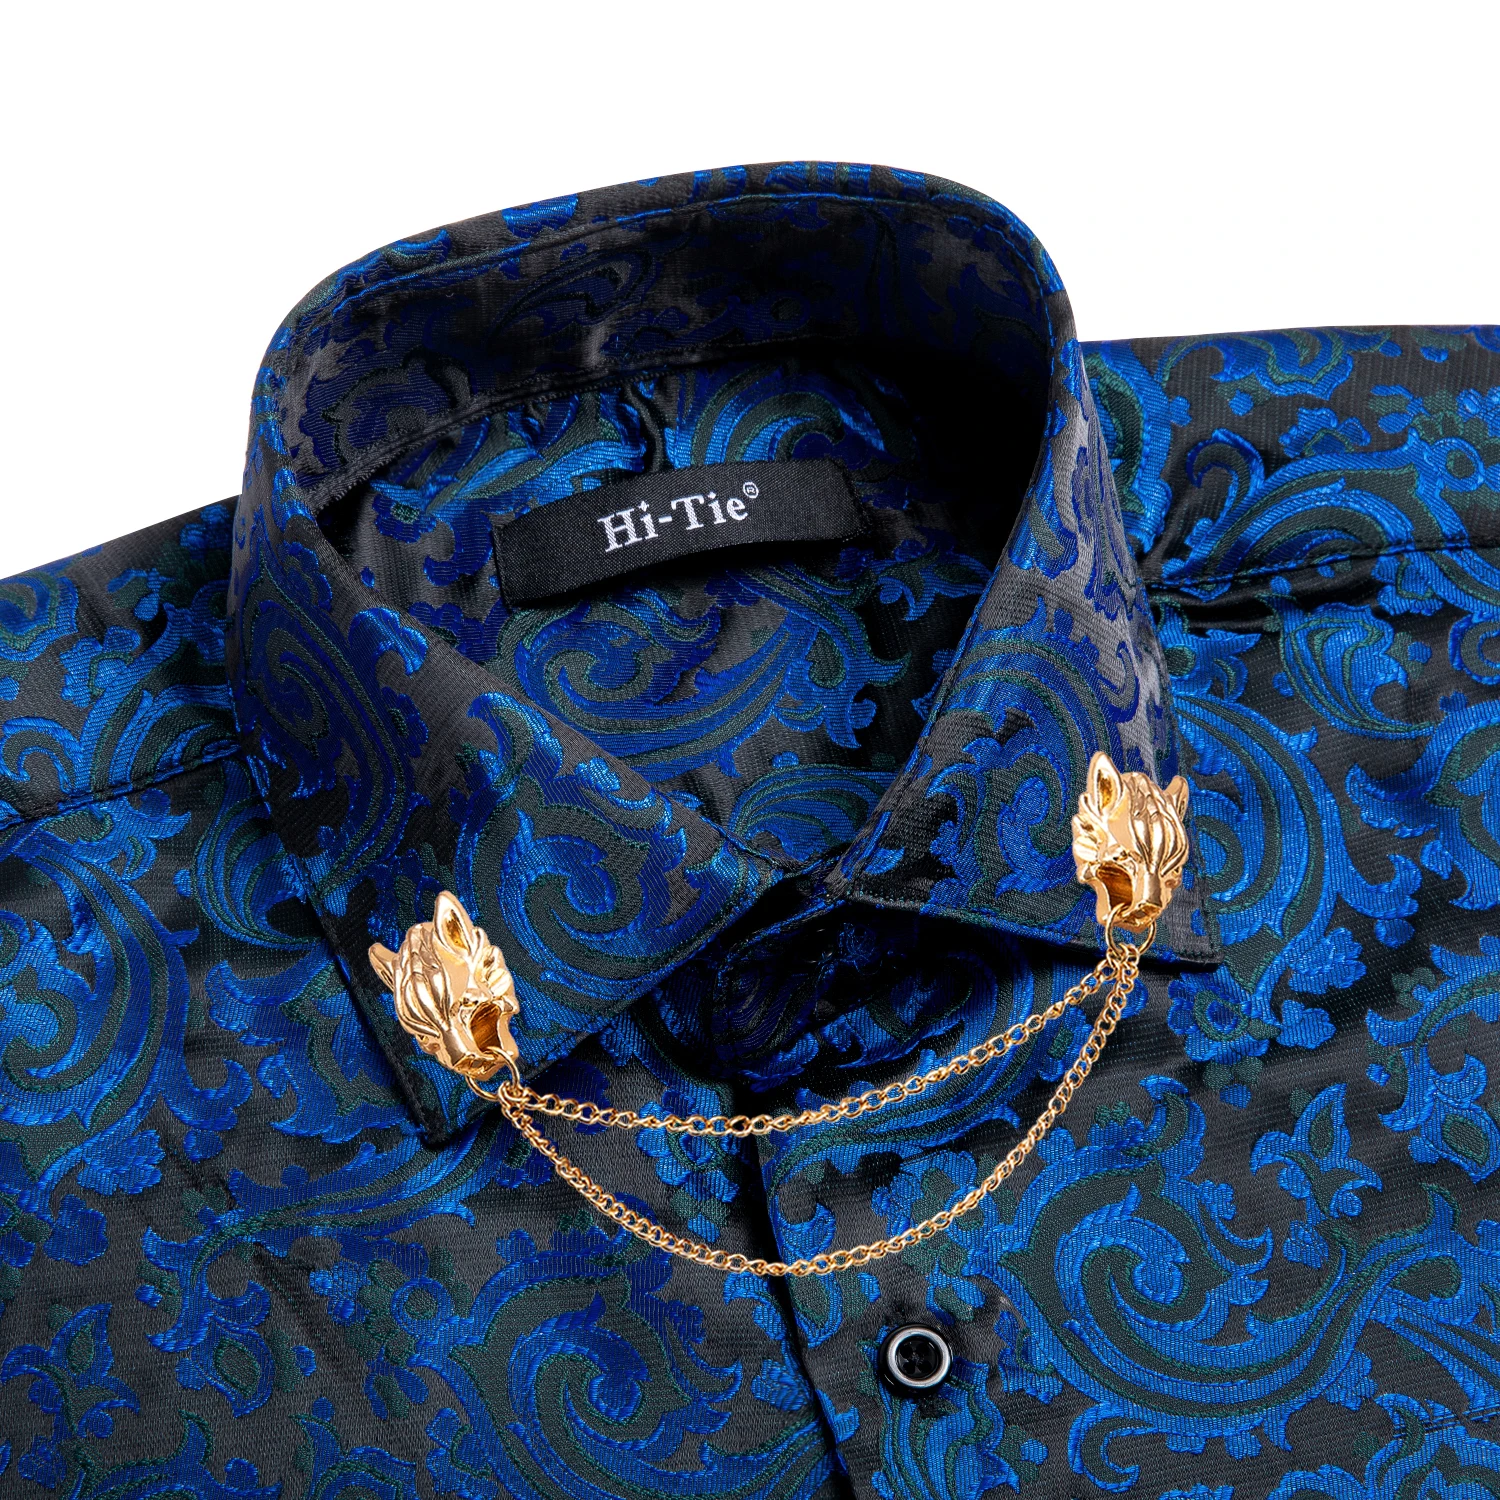 Formal Blue Black Mens Shirts Silk Spring Autumn Long Sleeve Slim Fit Paisley Jacquard Shirt For Male Business Party Gift Hi-Tie